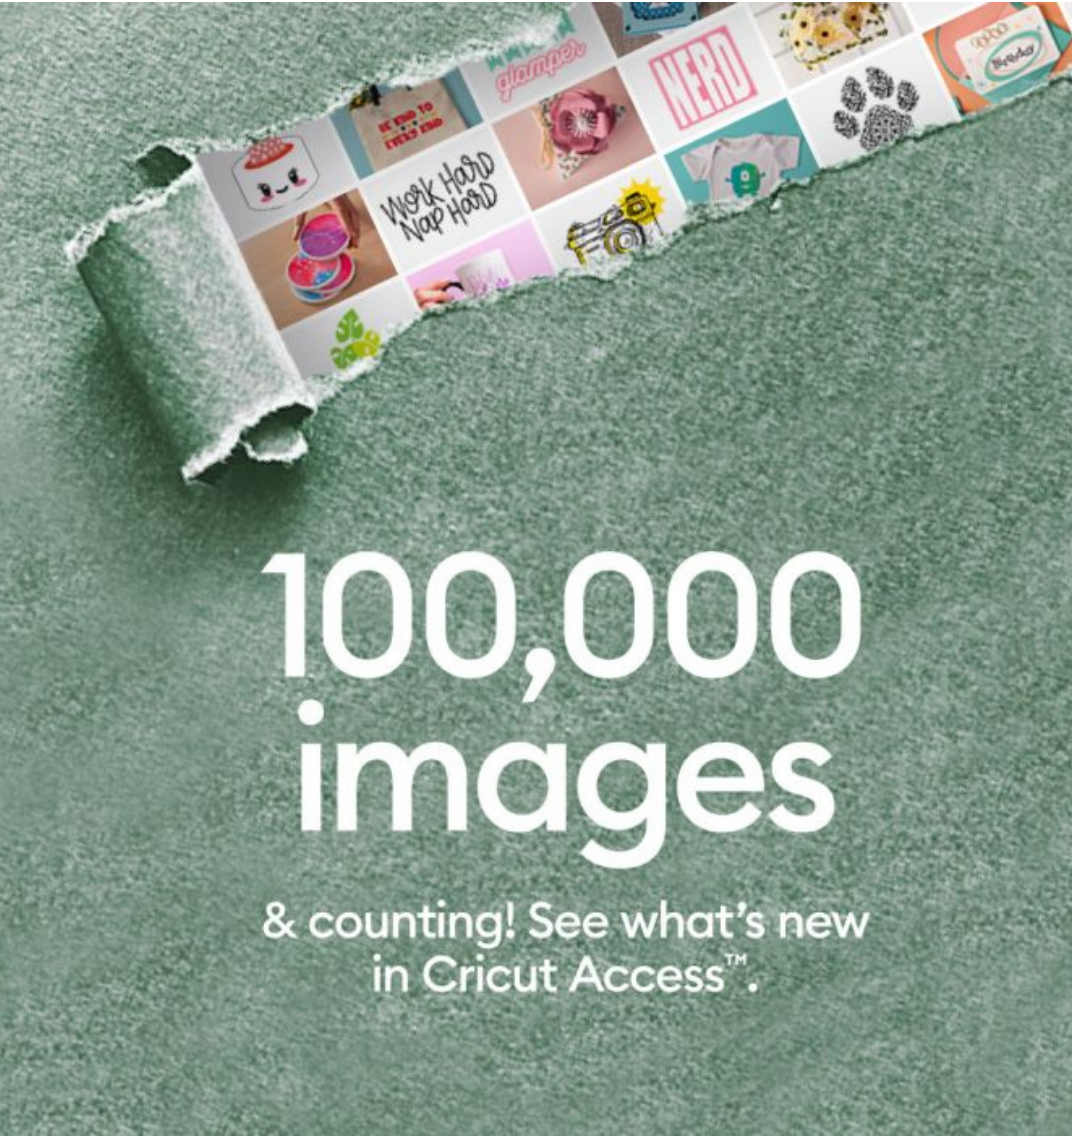 100,000 images written on a green square with a rip in the paper showing some imgaes.